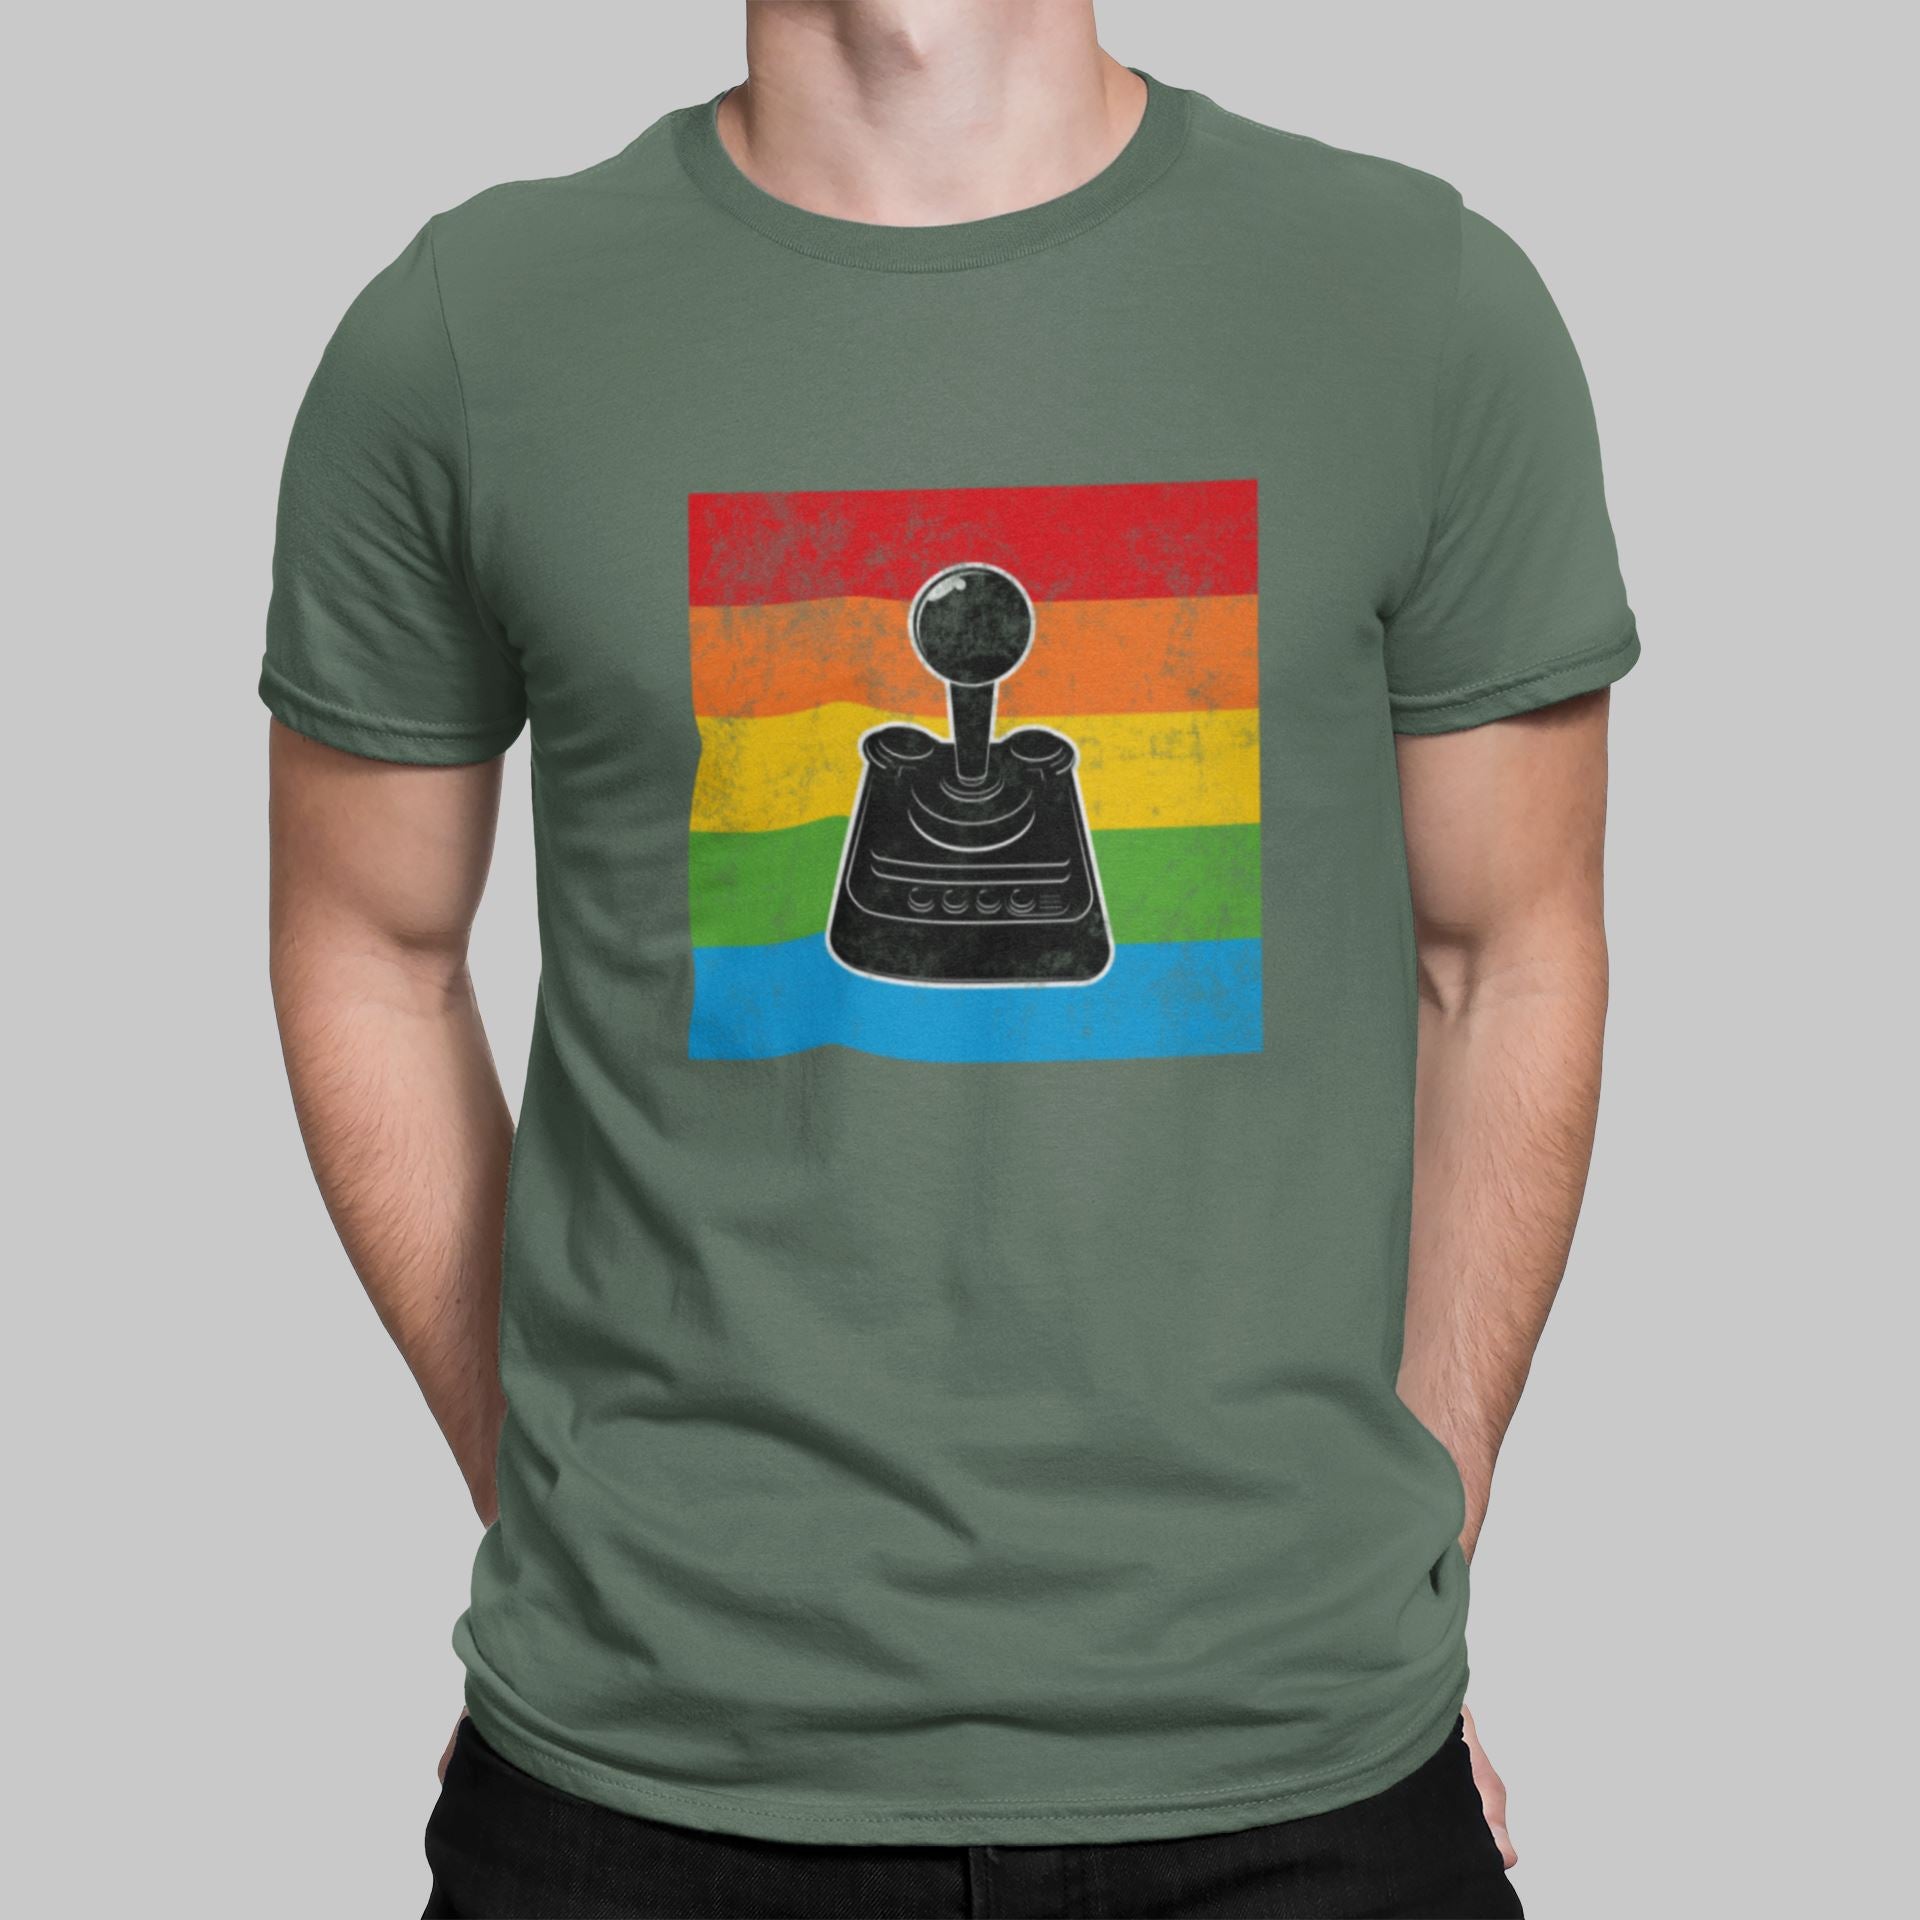 The C64 Iconic Joystick Retro Gaming T-Shirt T-Shirt Seven Squared Small 34-36" Military Green 